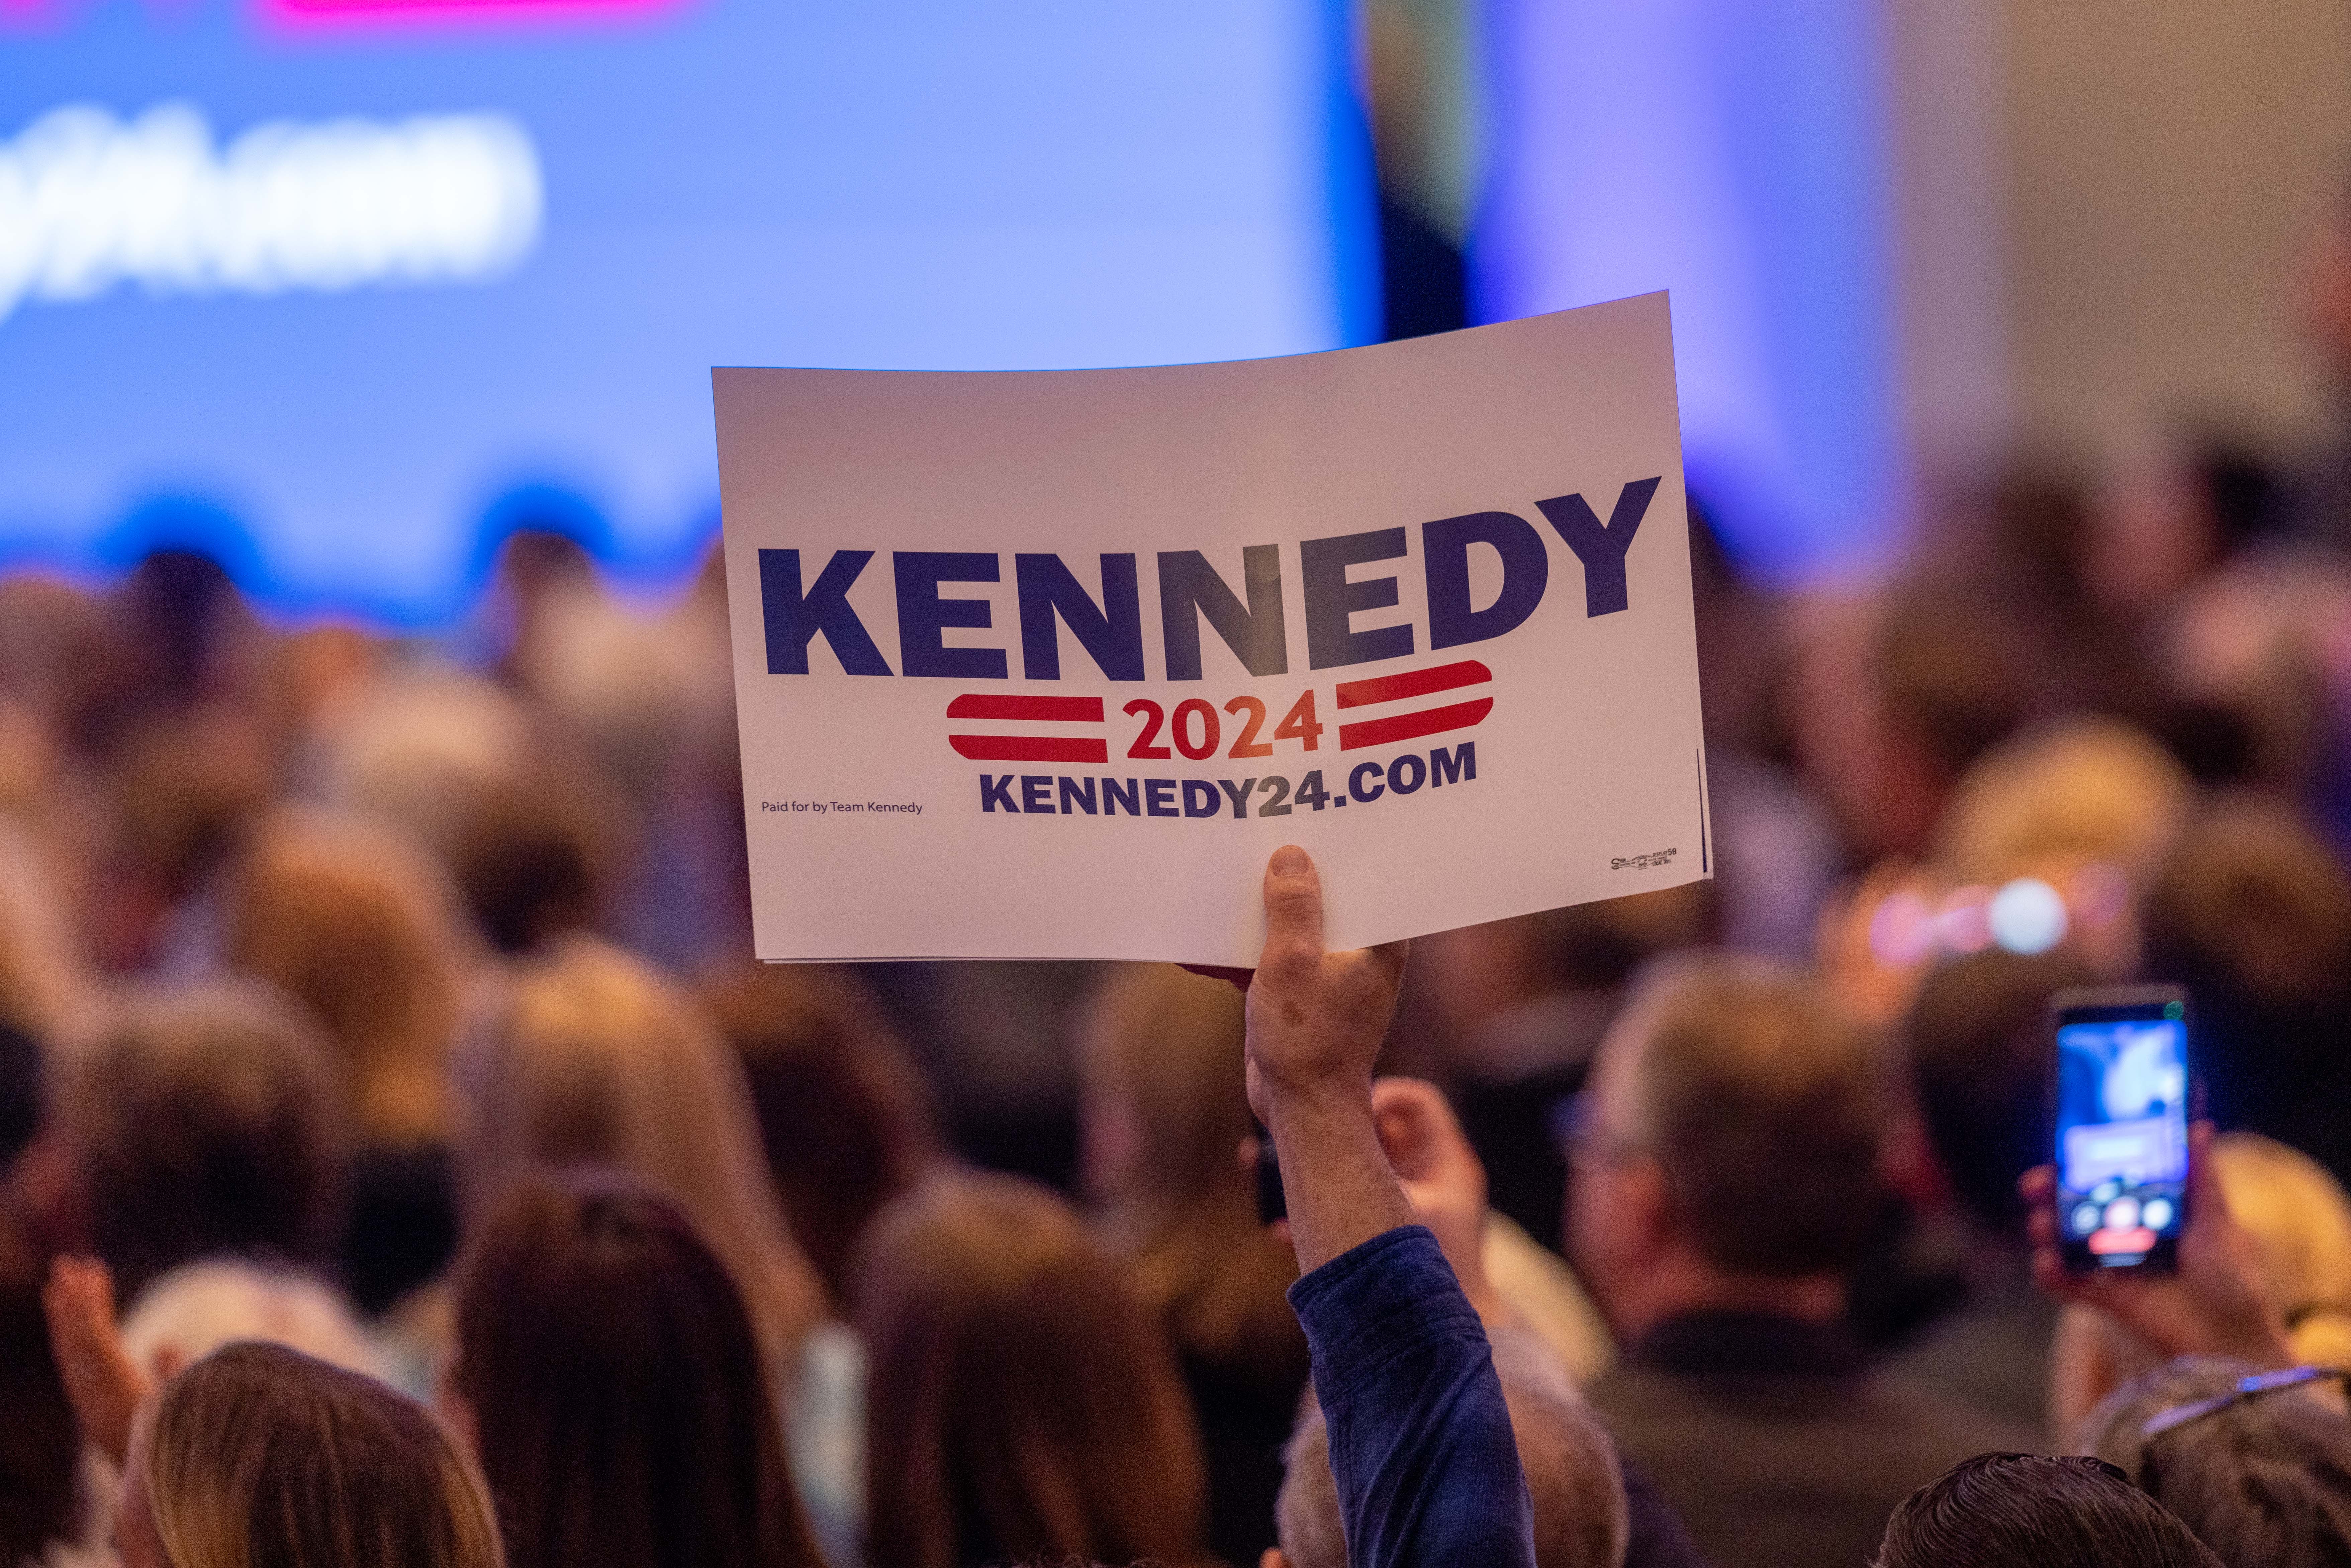 Kennedy campaign